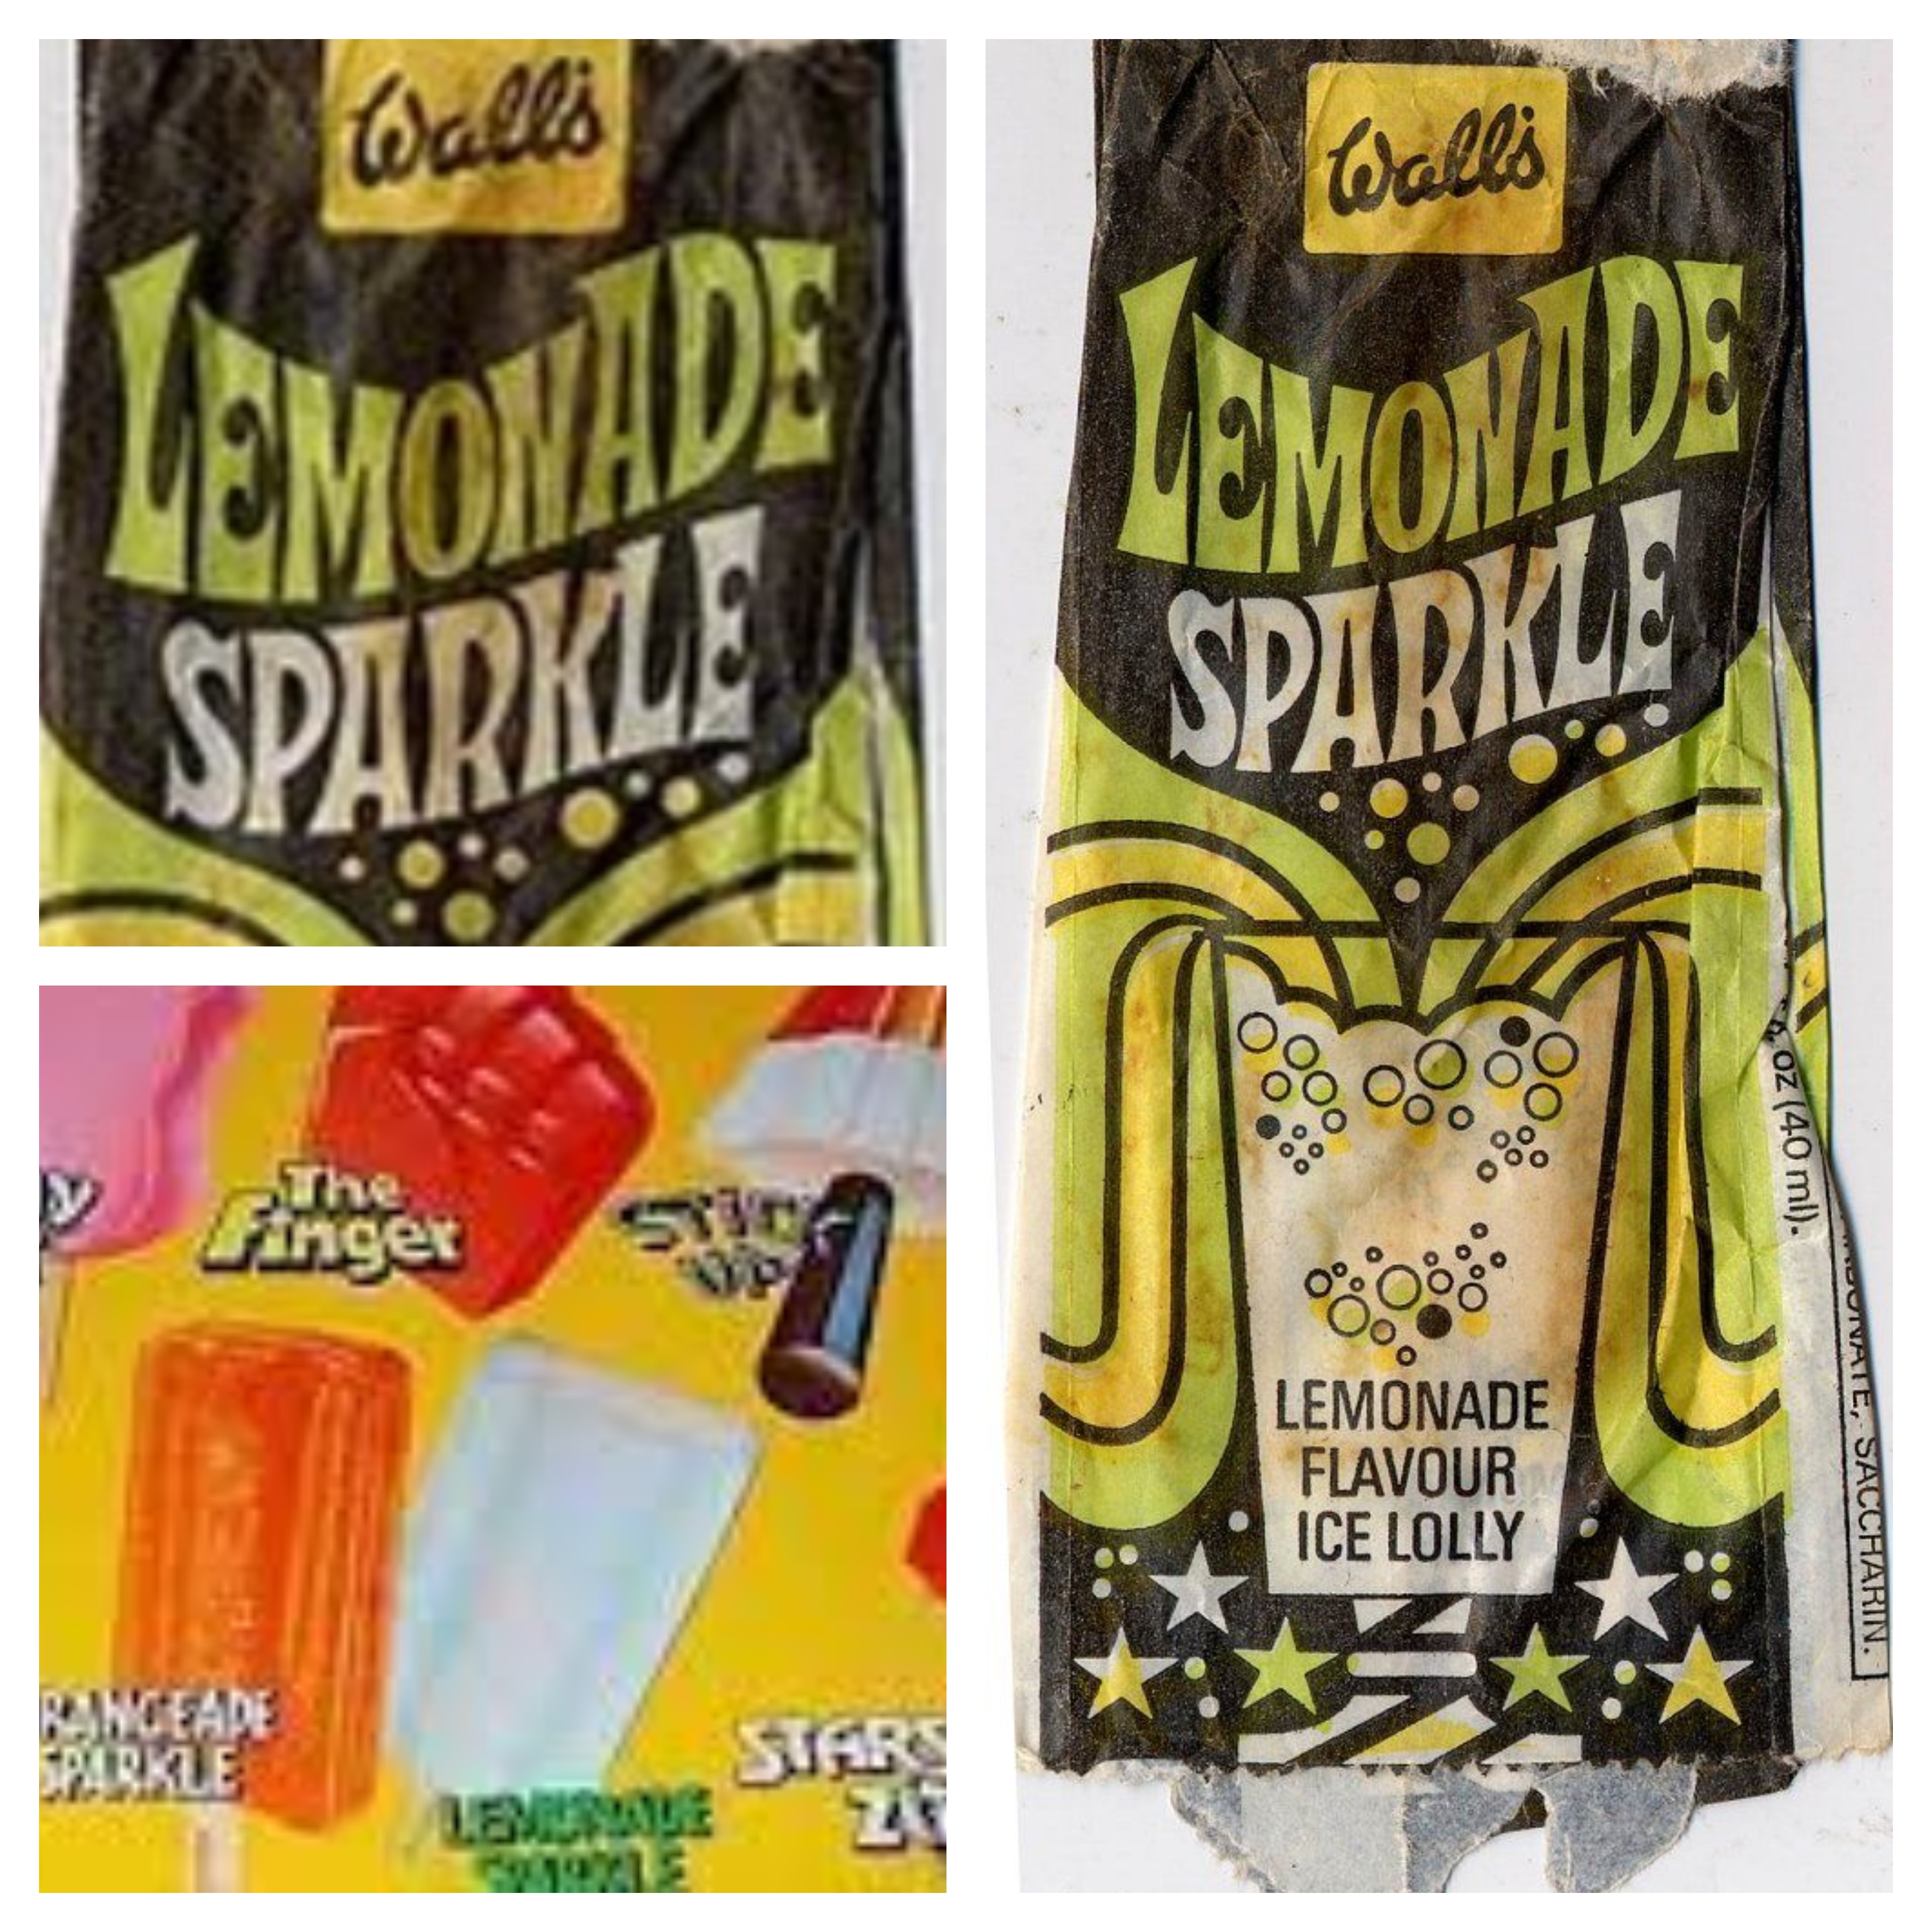 Lemonade Sparkle ice lolly in a black and green wrapper